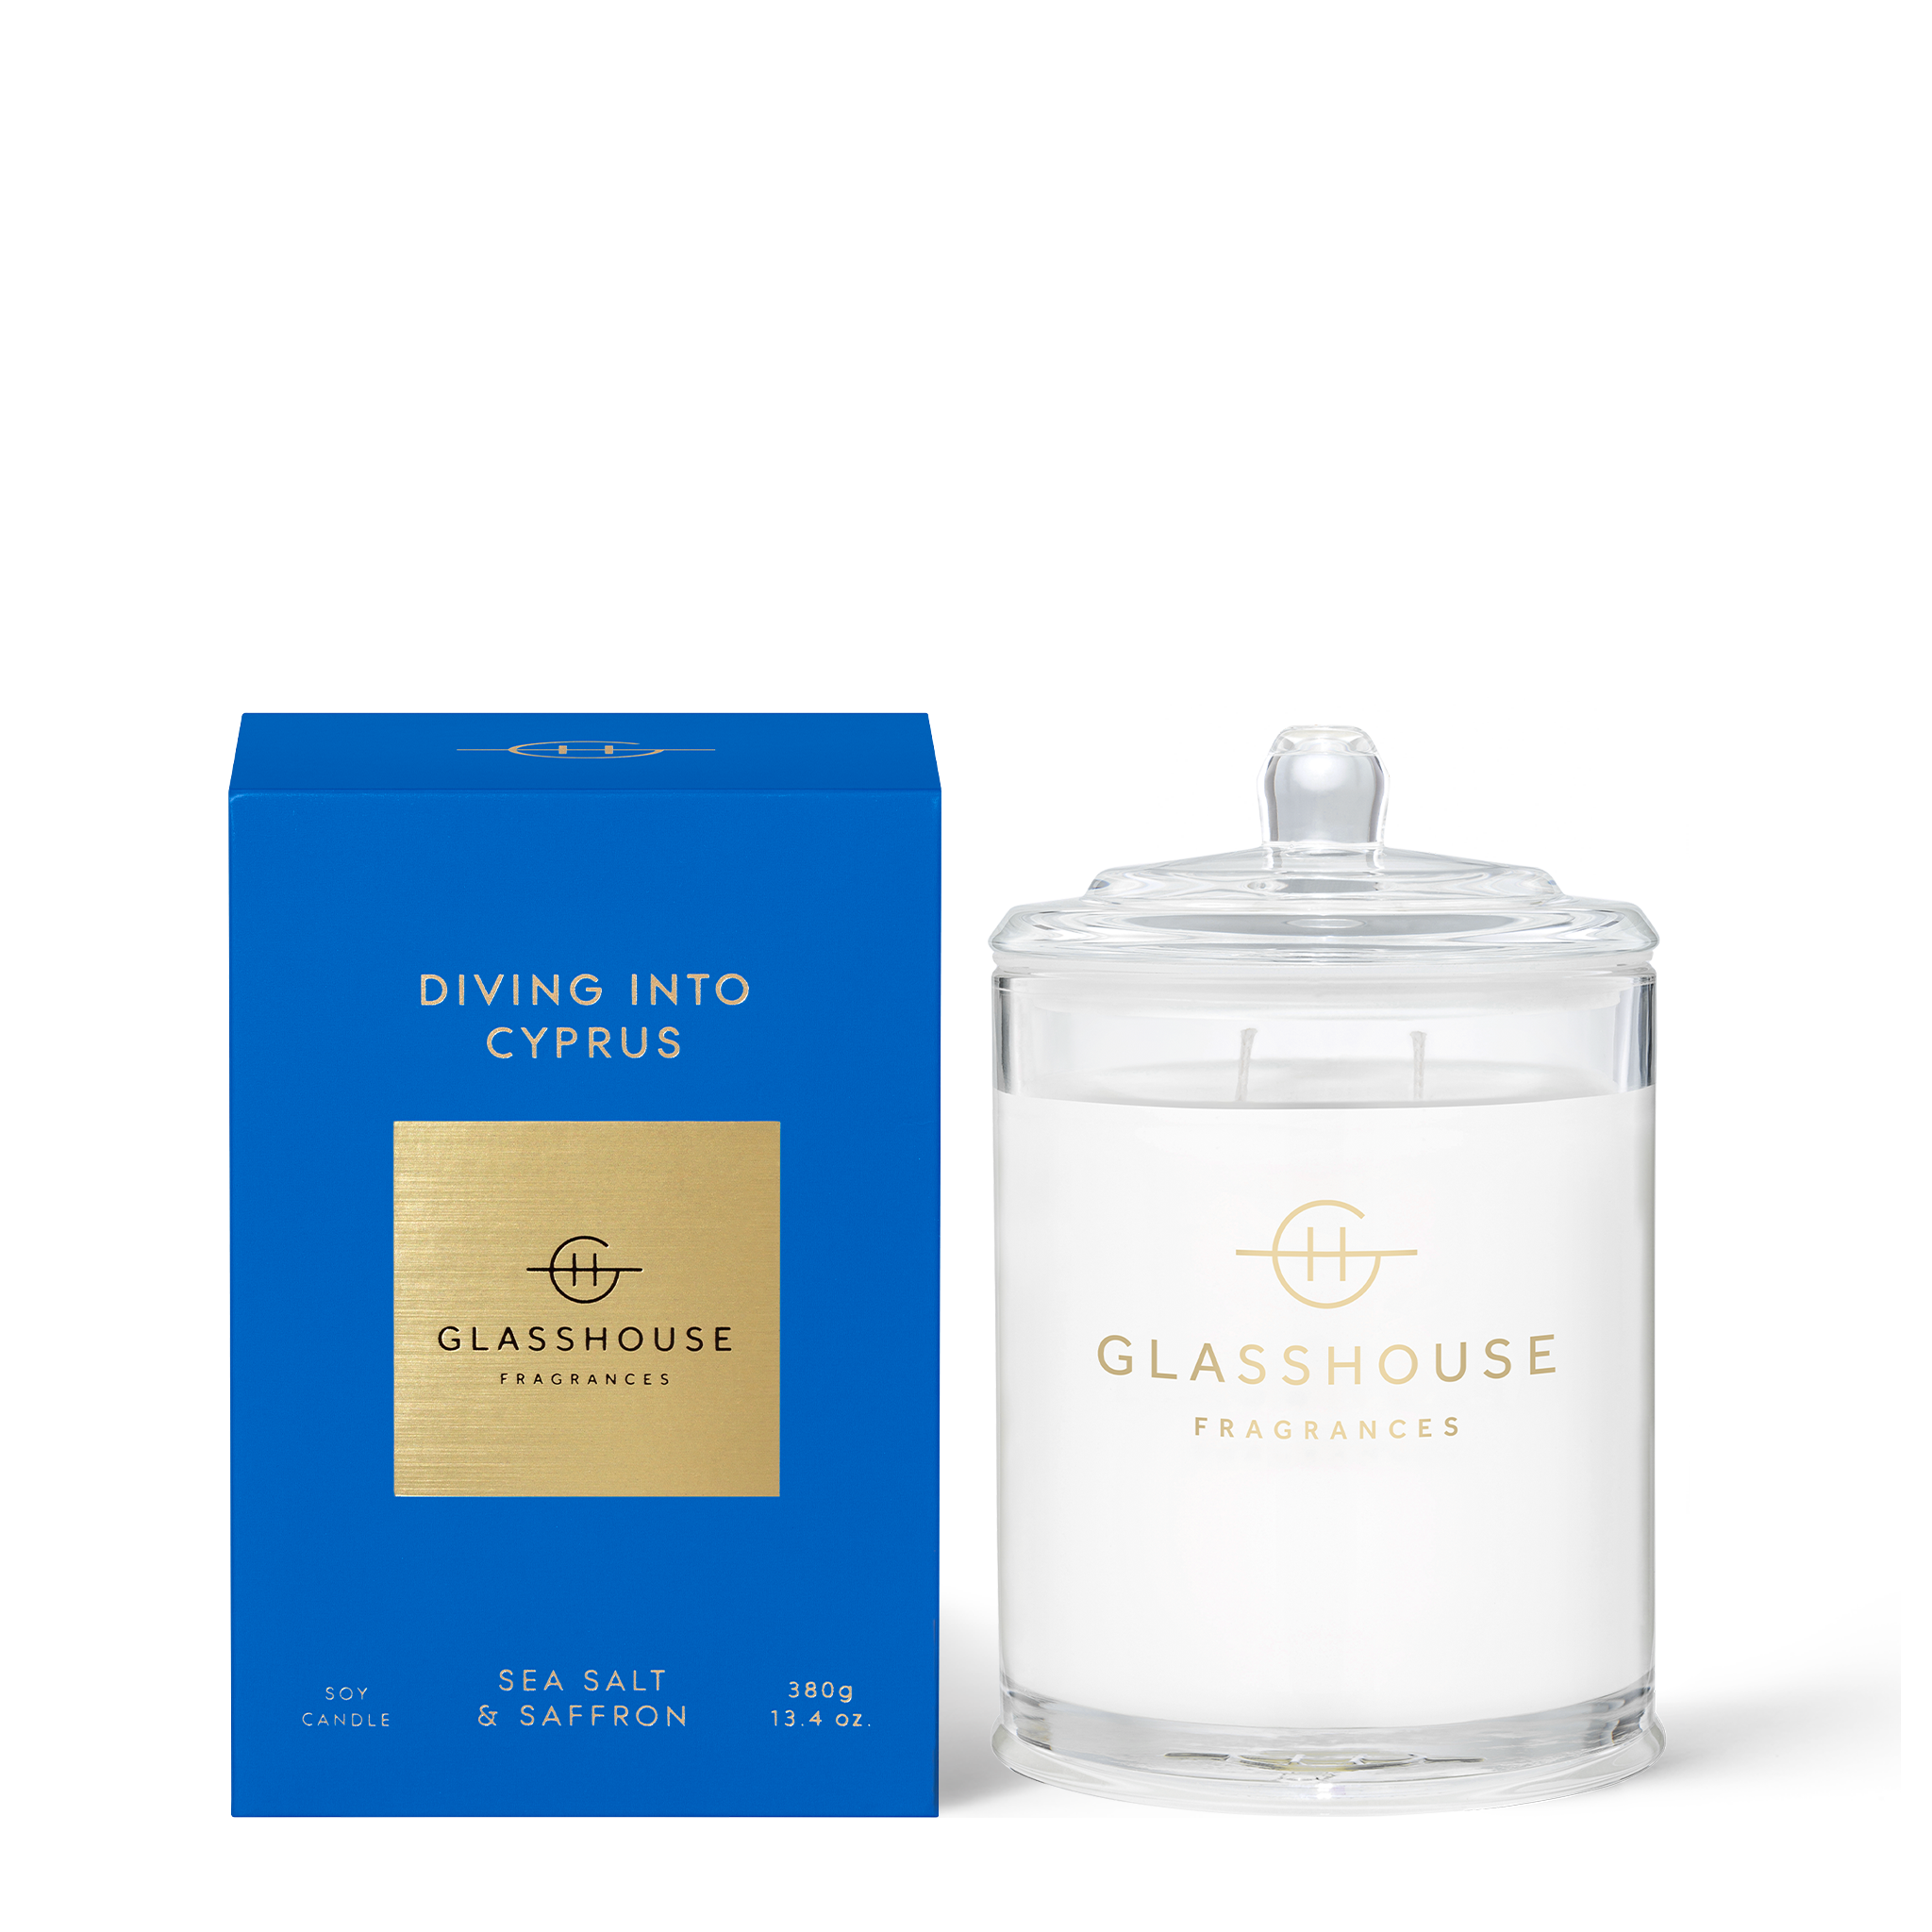 Glasshouse Diving Into Cyprus 380G Candle